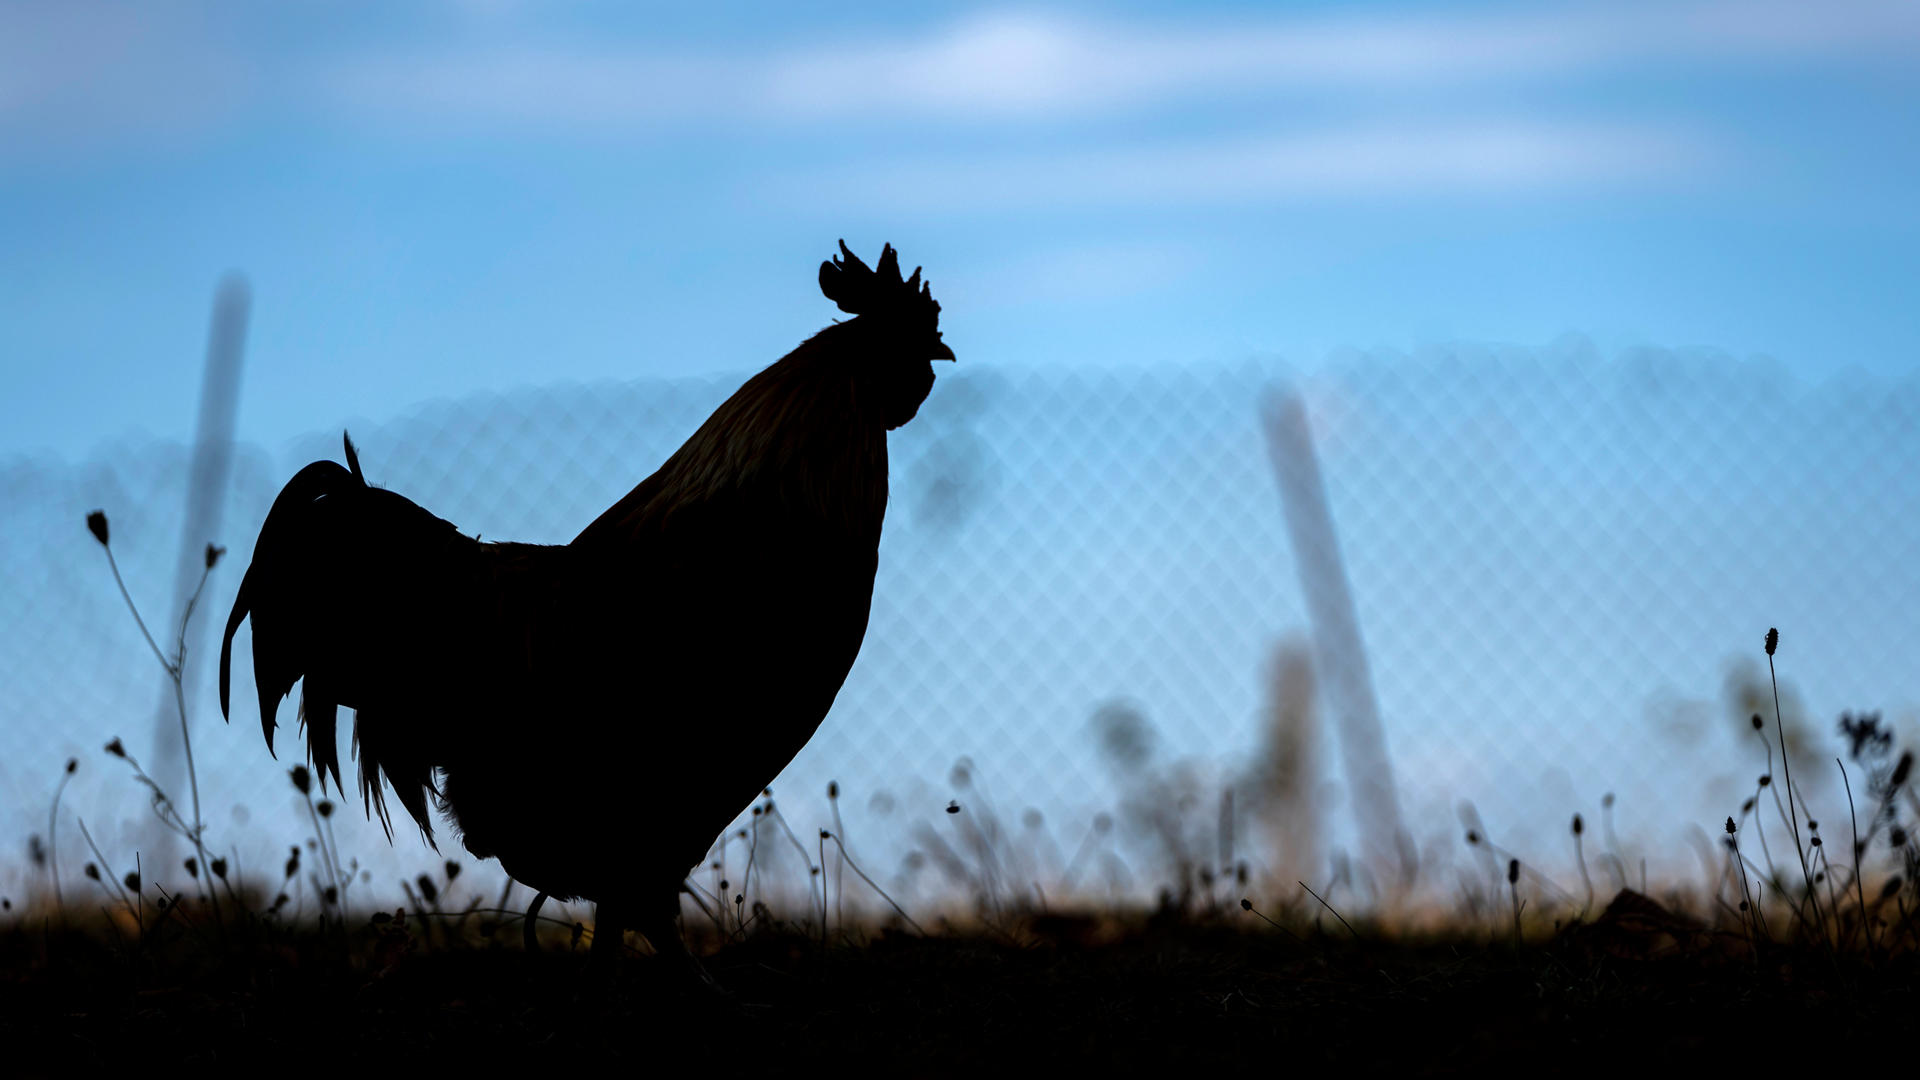 Sustainable Free Range Raised Rooster Crows At Dawn